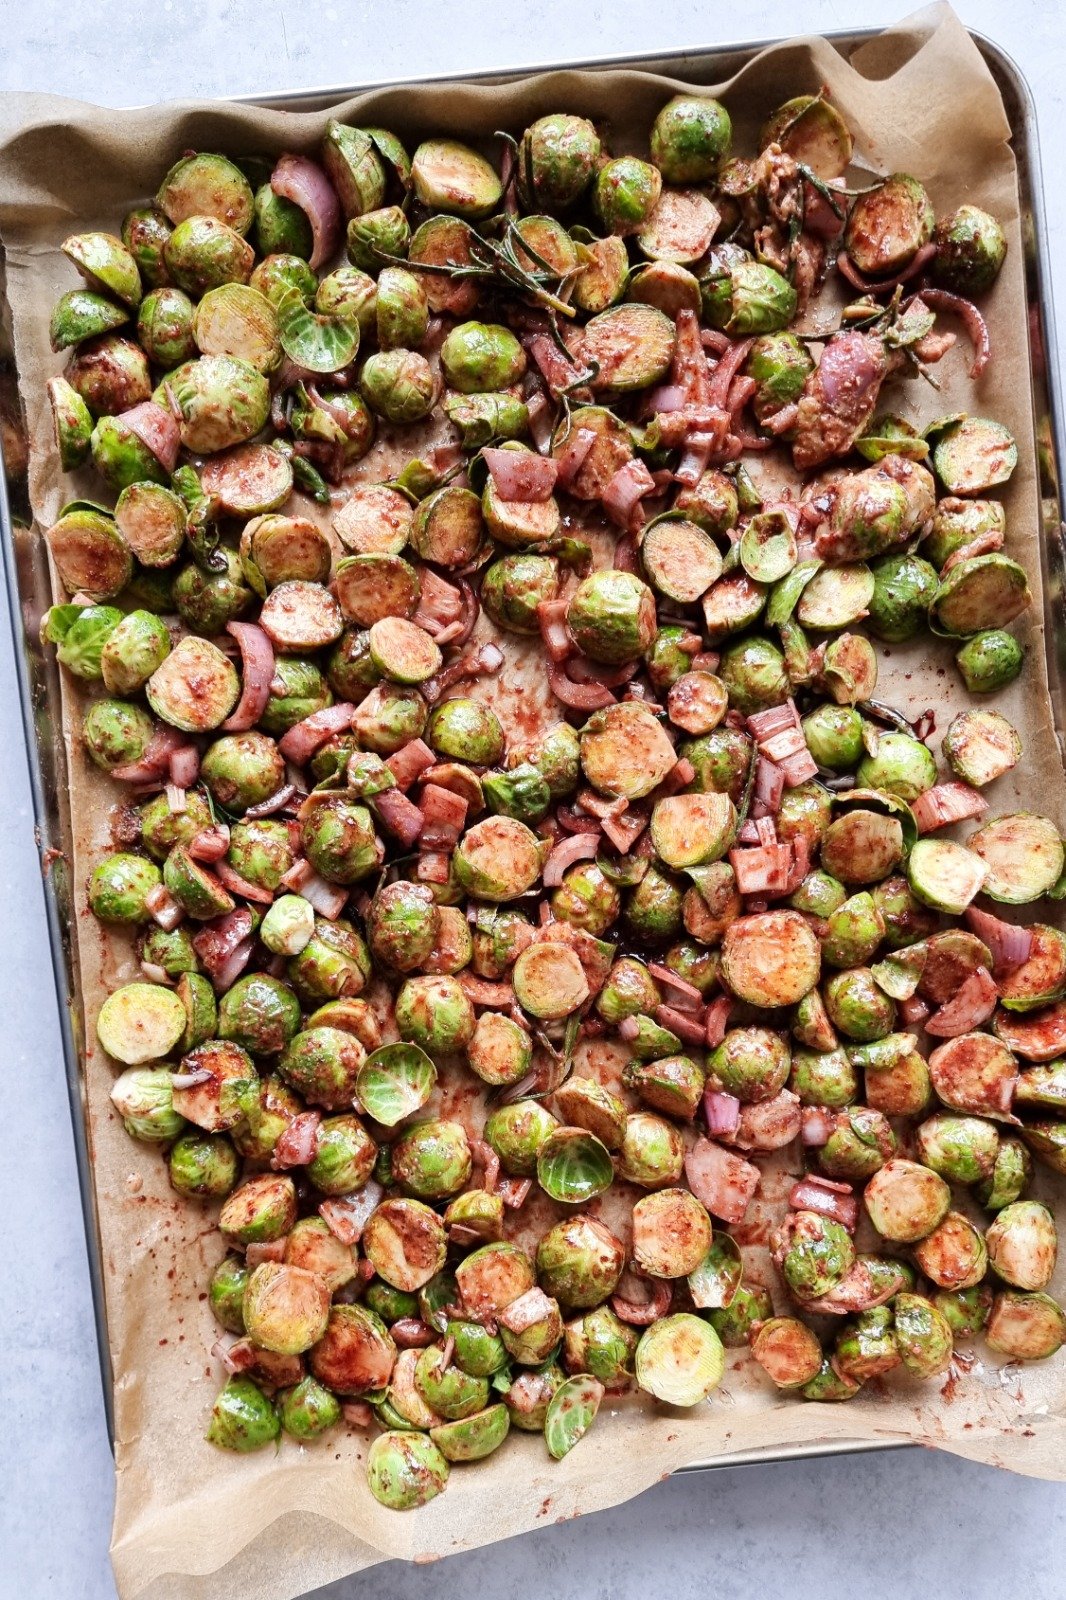 Brussels sprouts laid on a baking tray with other chopped veggies